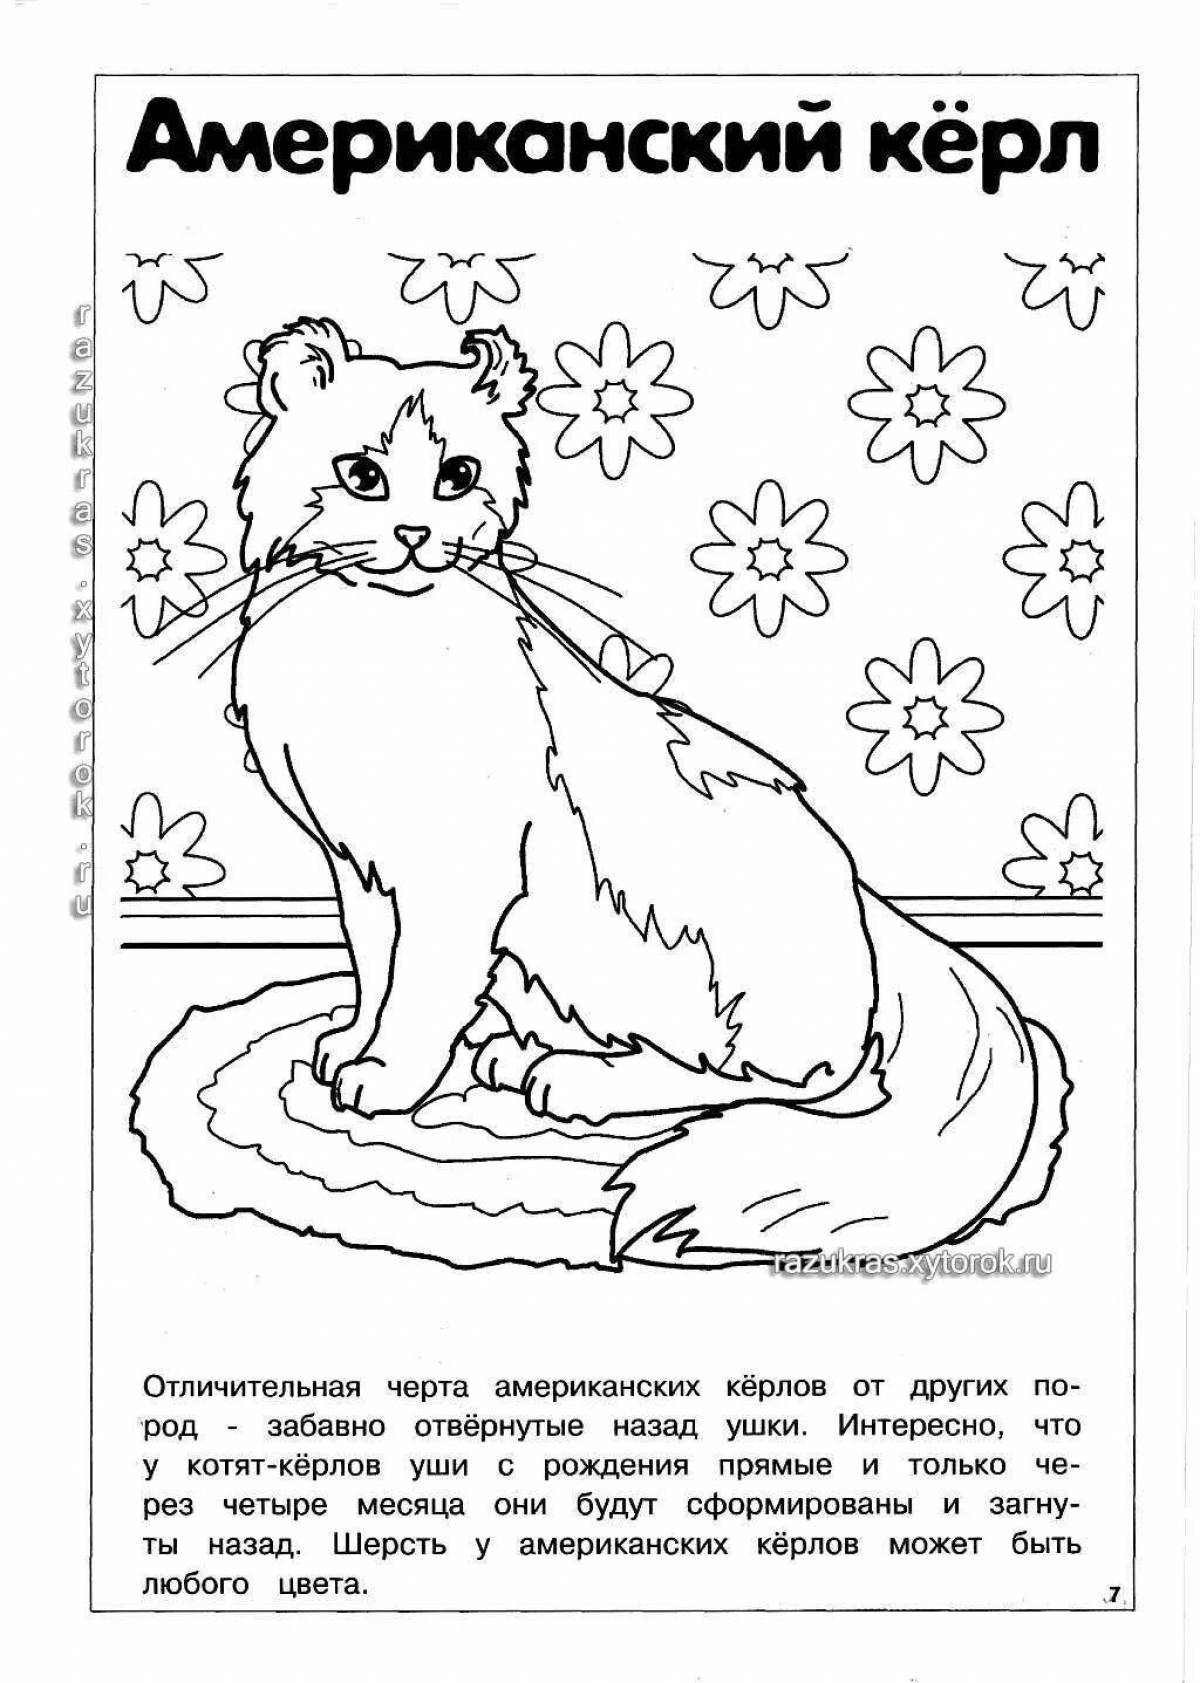 Adorable cat breed coloring book with names